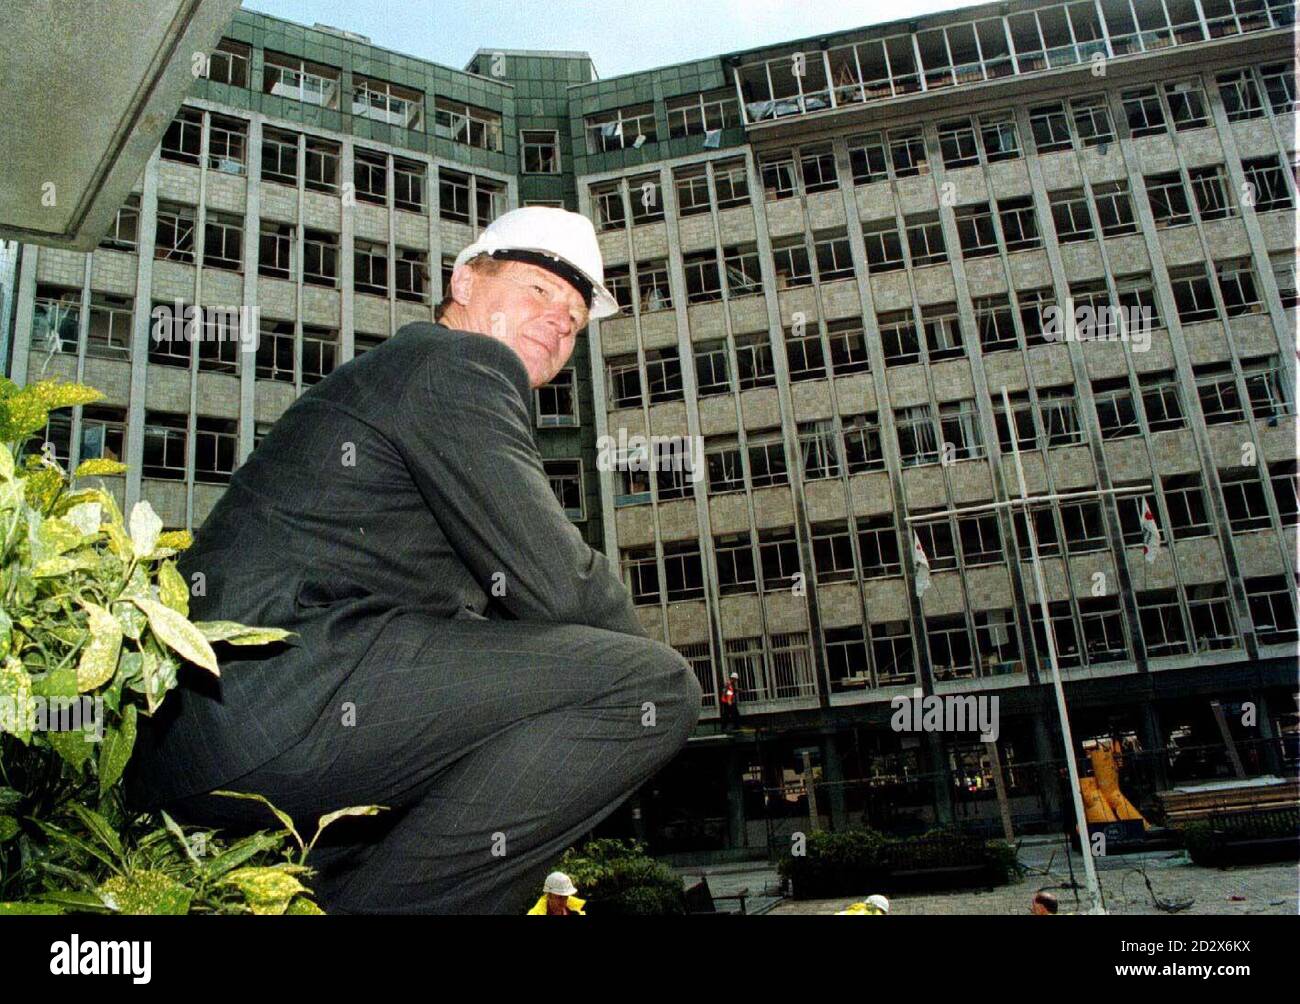 Liberal Democrat leader Paddy Ashdown surveys the damage caused to Manchester city centre by last Saturday's massive IRA bomb. Photo by Brian Williamson/PA/POOL. Stock Photo